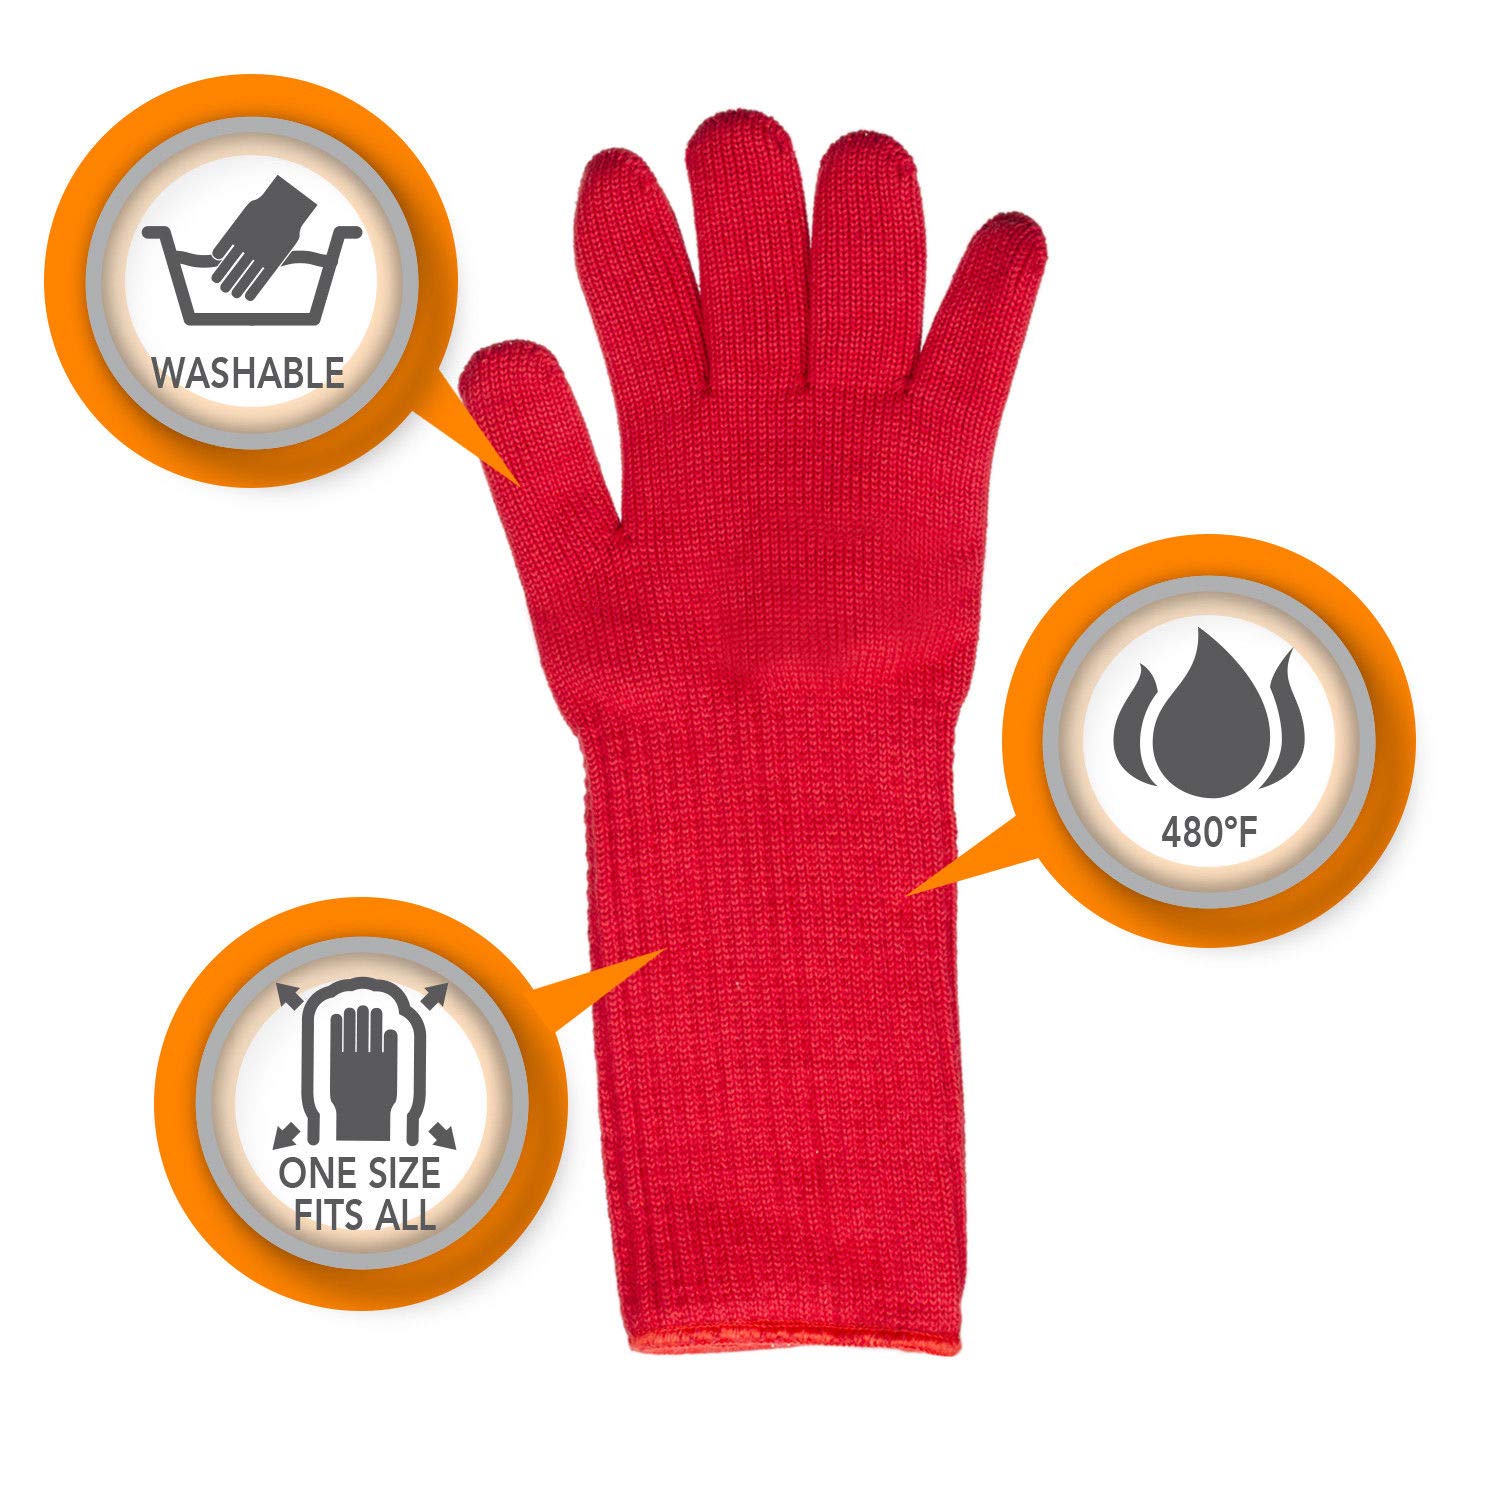 Super Oven Glove Extra Thick Extra Long Heat Resistant Oven Mitt Pot Holder Red